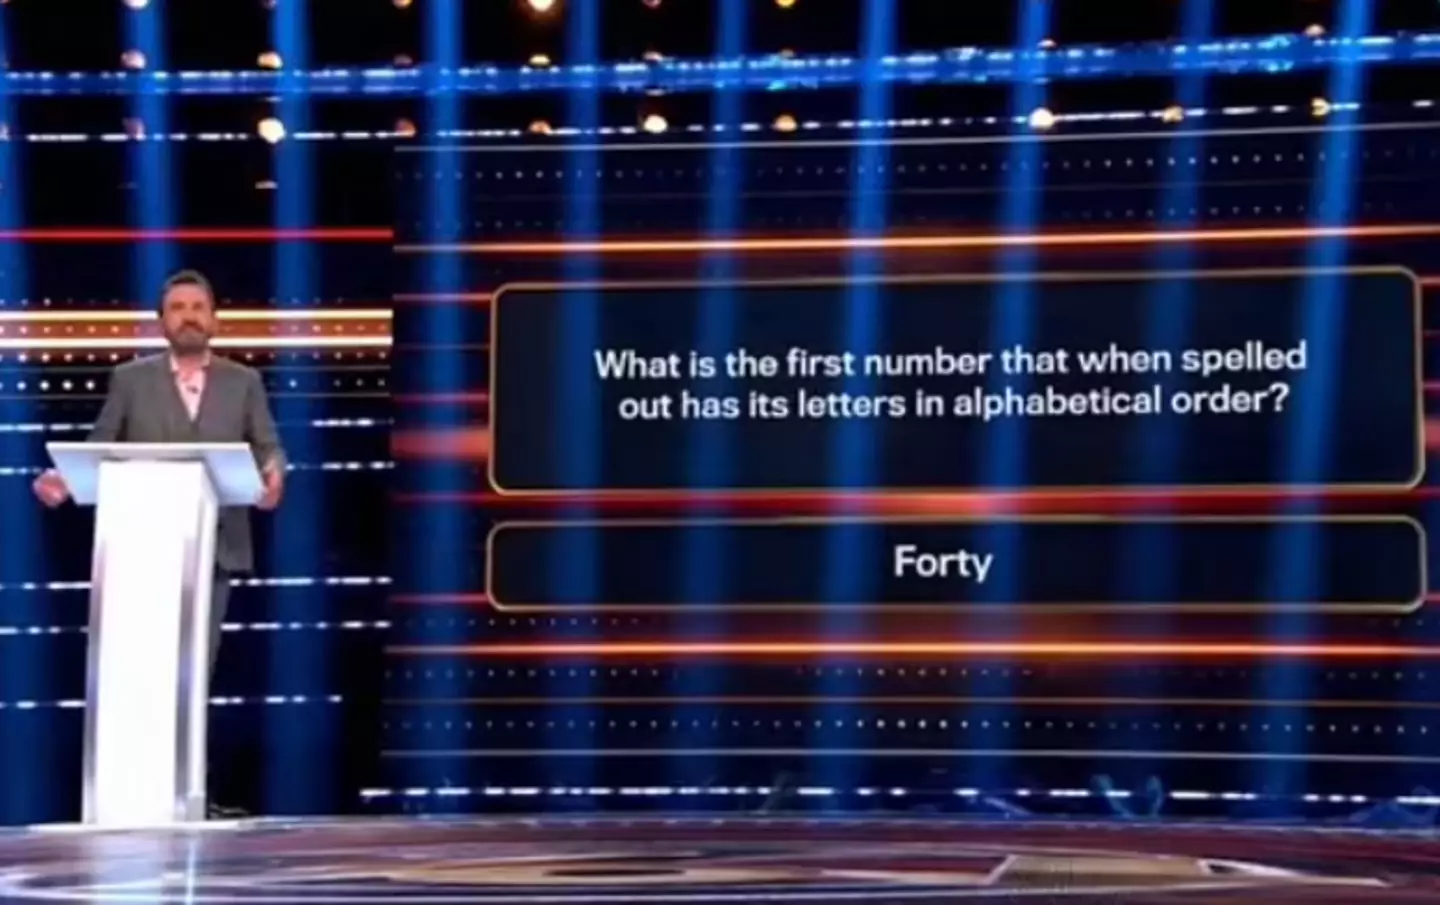 The correct answer was indeed 'forty'.